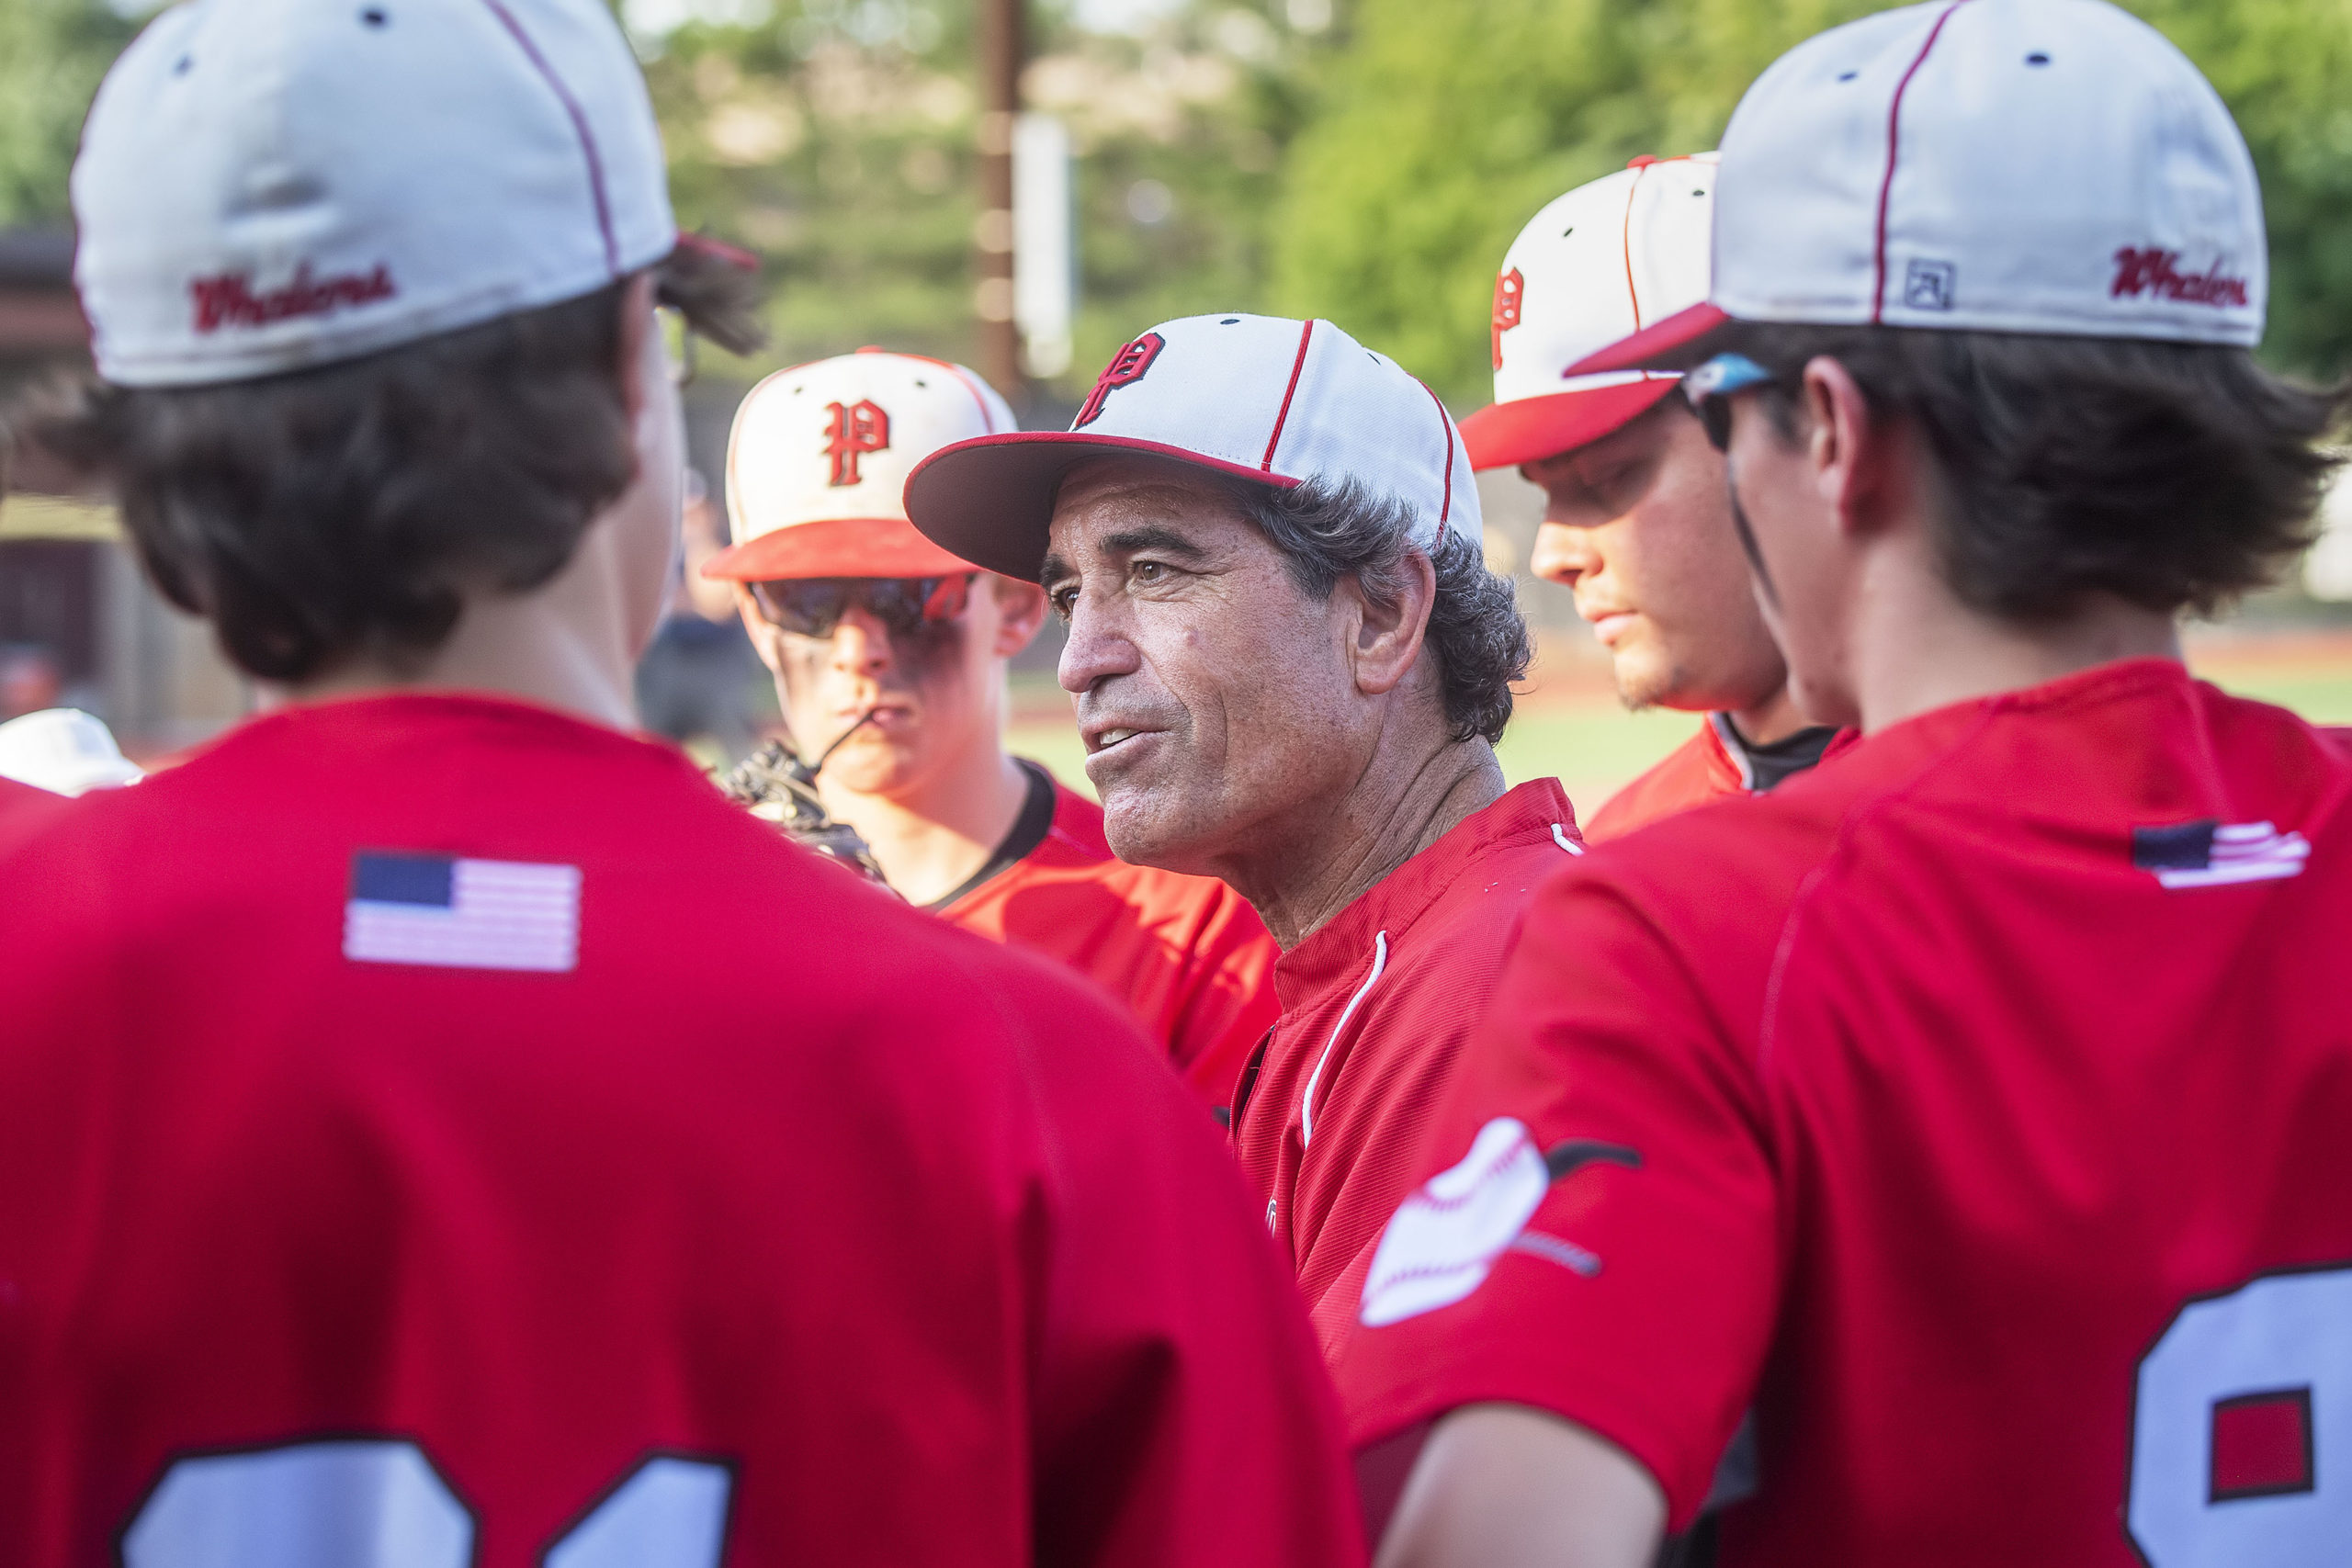 Pierson assistant coach Benito Vila gives the team a pep talk after a rough inning.